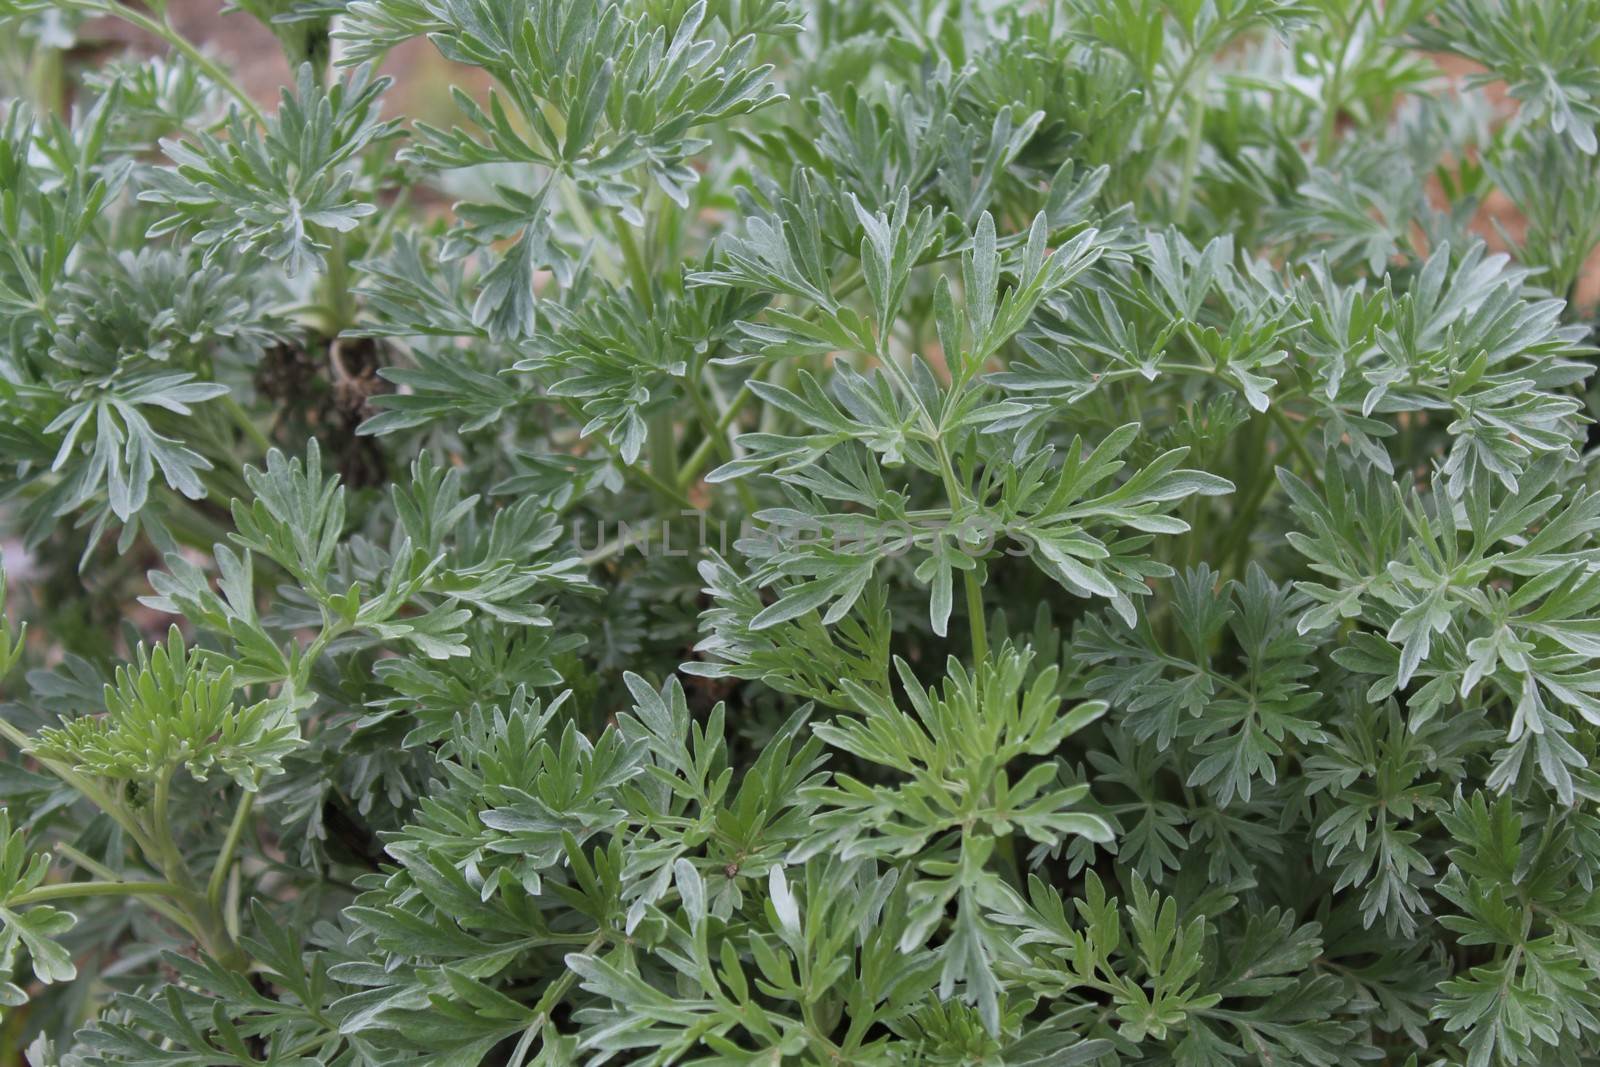 The picture shows healthy wormwood in the garden